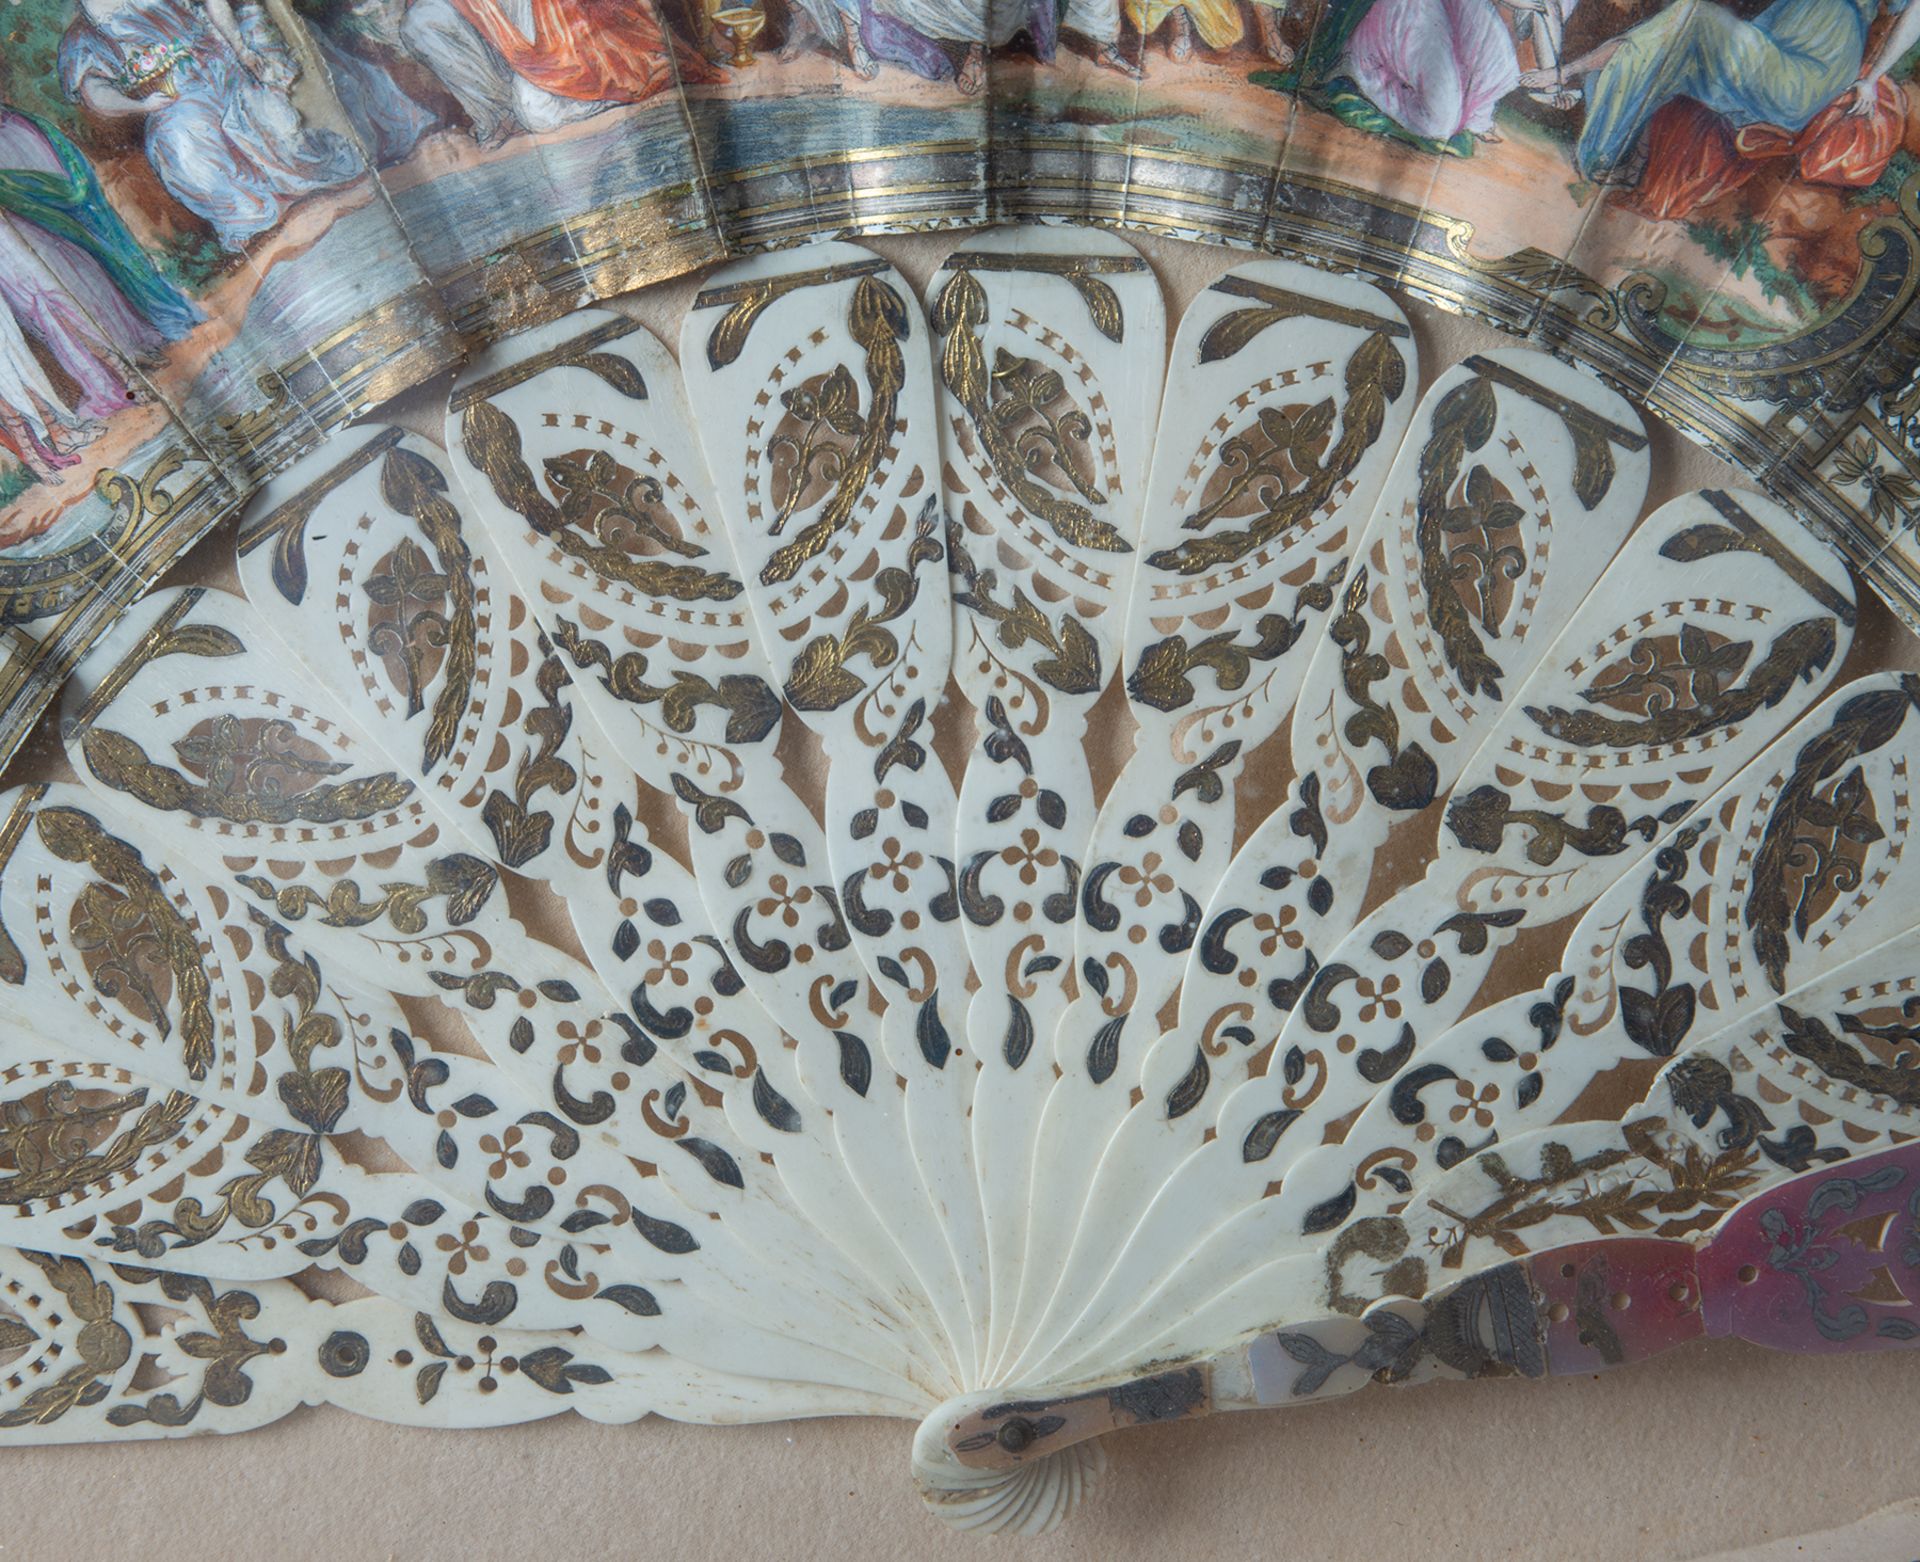 Austrian fan profusely gilded with flourishes and bathing scene painted in oil, 19th century - Image 3 of 3